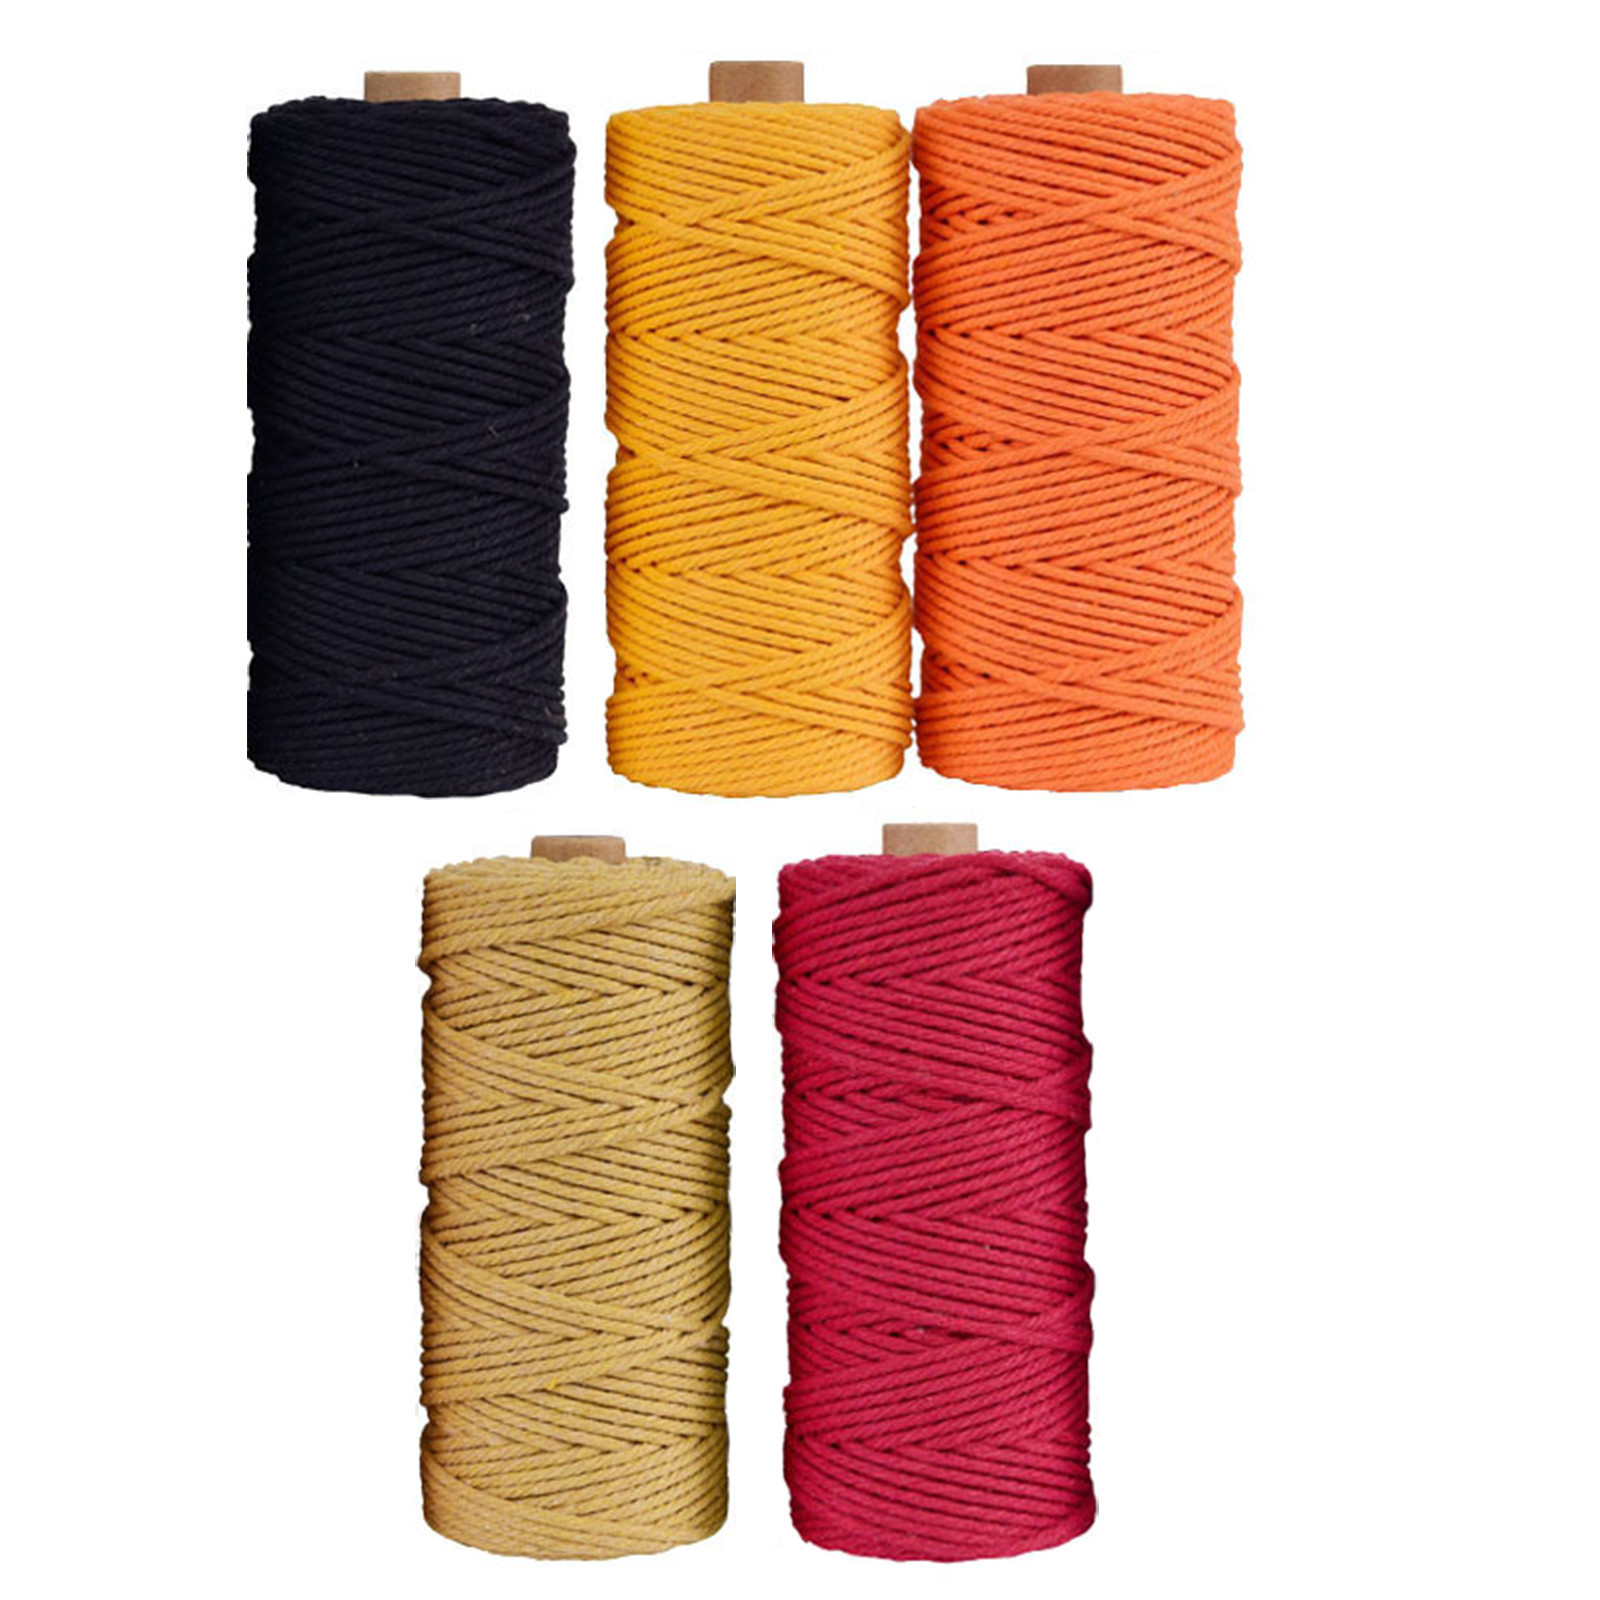 4# 3mm Colorful Thread Cord Handmade Crafts Diy Beige Twisted Cotton Macrame Cord Twine Rope String Home Textile Decoration